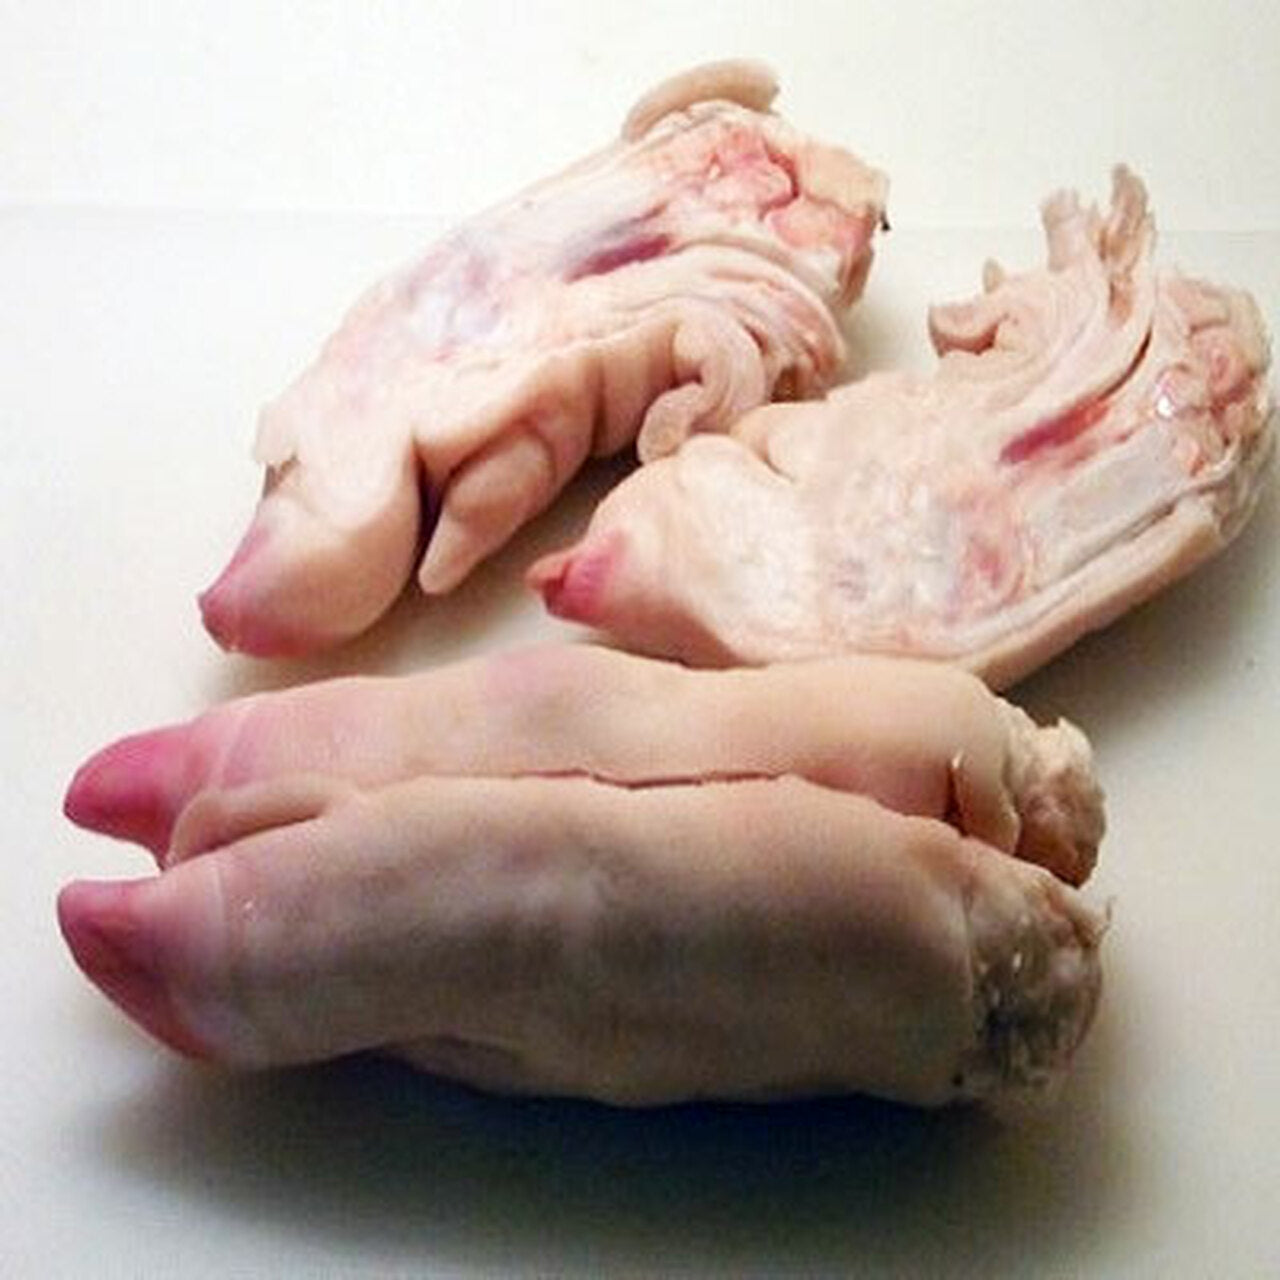 Pig Trotters